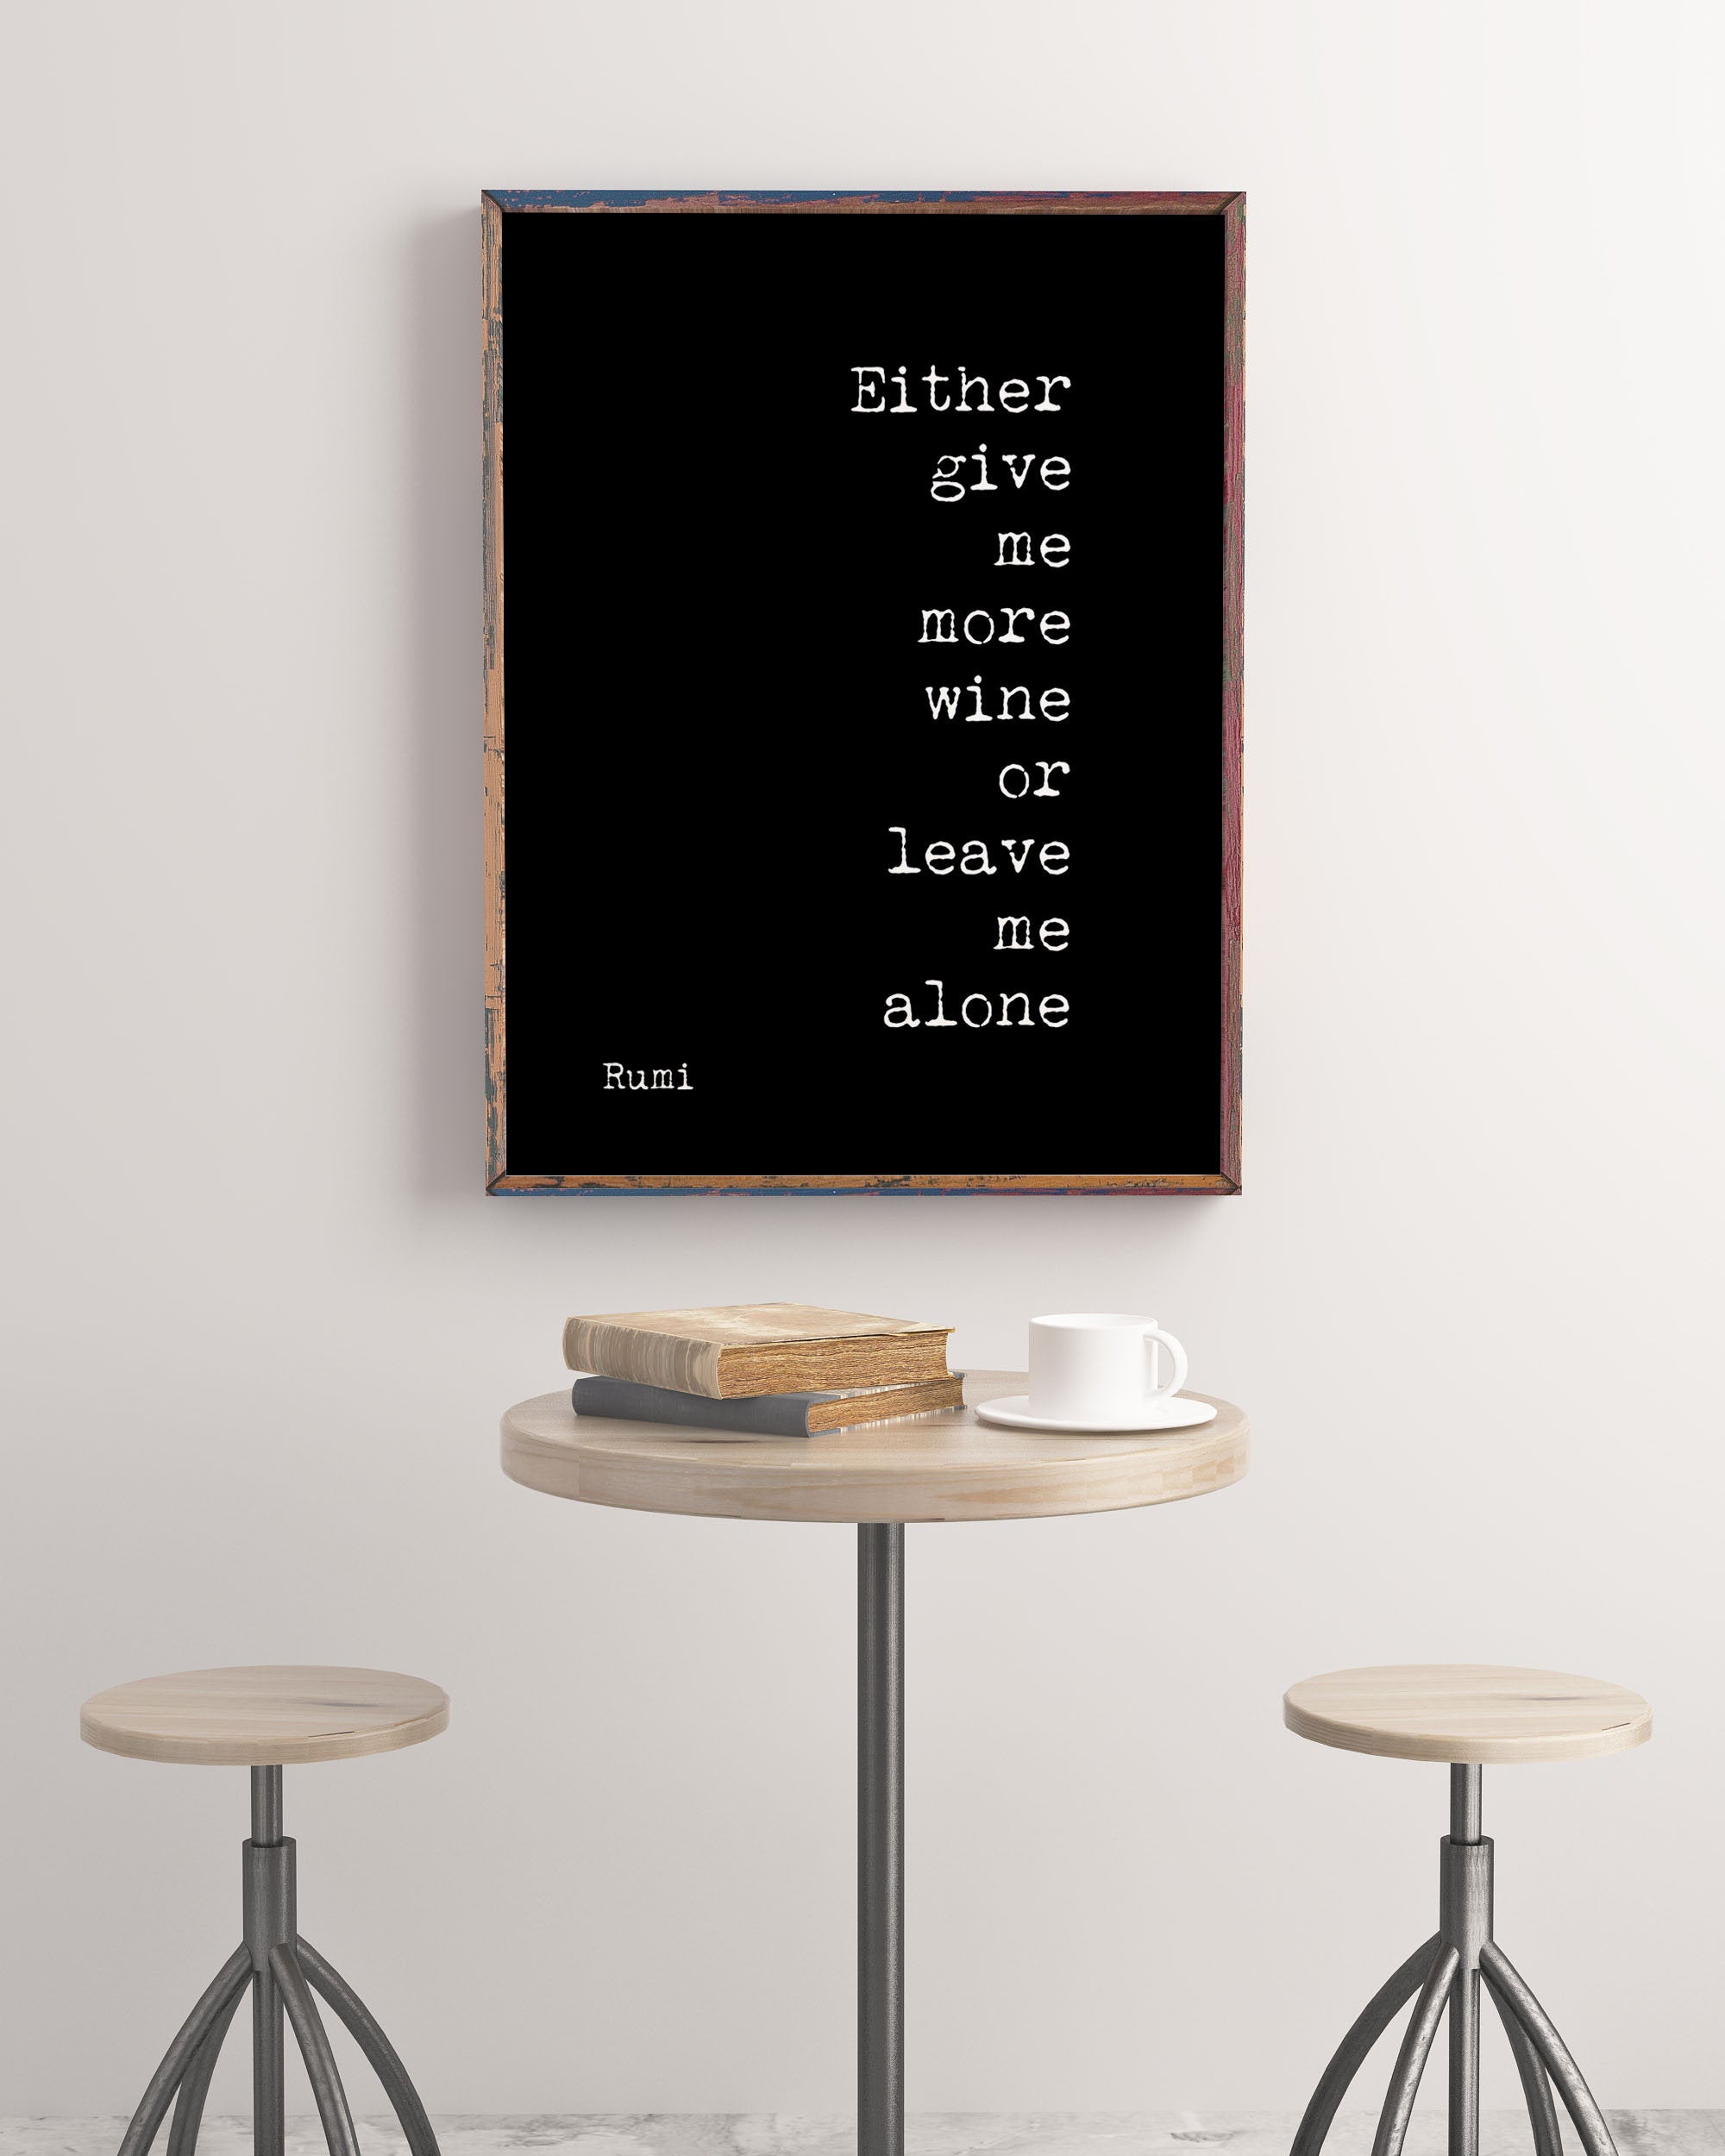 Rumi Quote Print in Black And White, Give Me More Wine, Ideal Wine Wall Art For Dining Room Wall Art Or A Kitchen Decor, Unframed - BookQuoteDecor